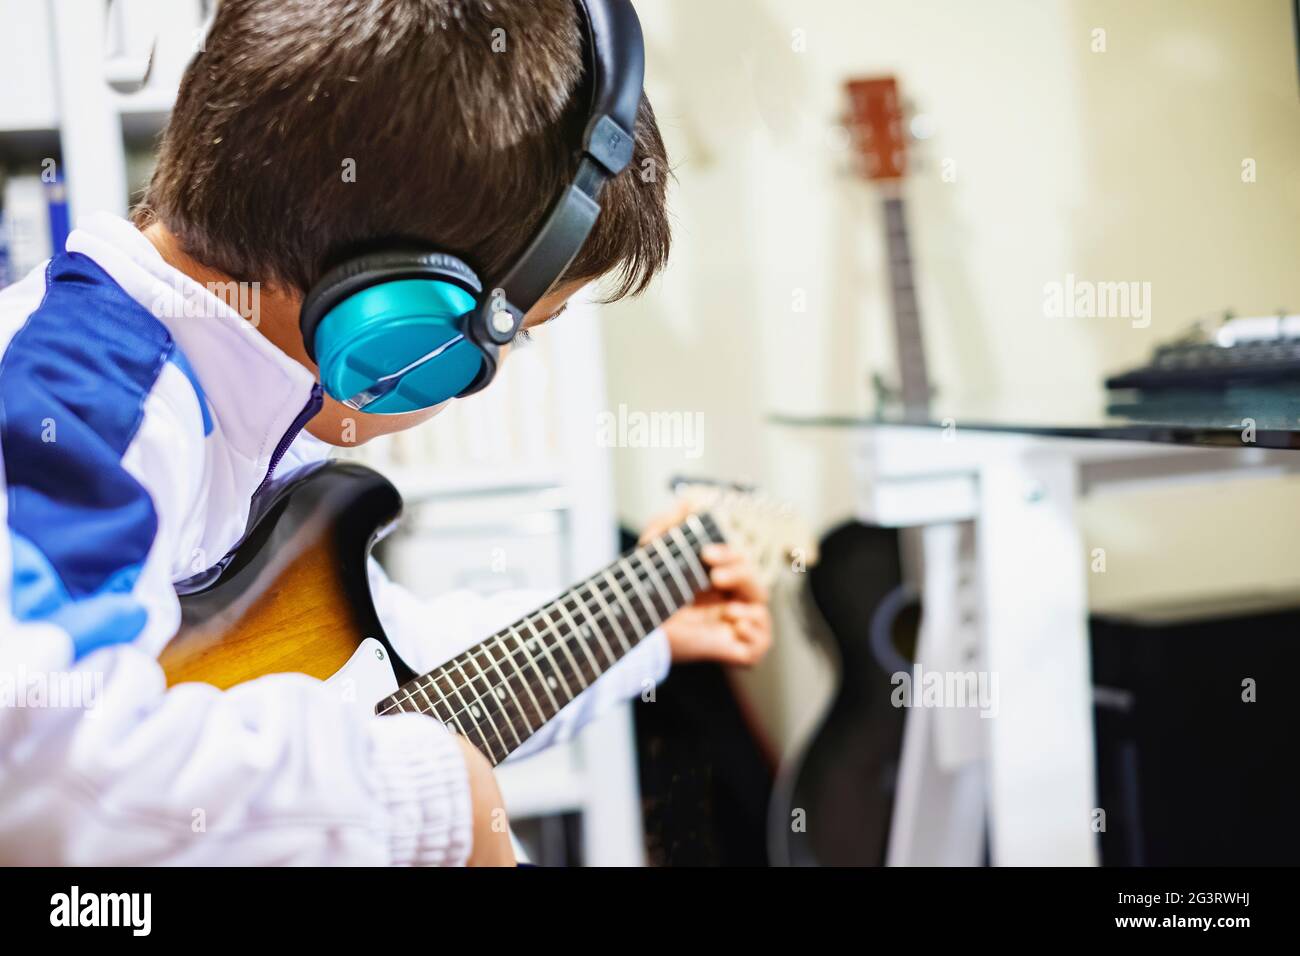 boy playing the electric guitar with blue headphones in a recording studio, horizontal Stock Photo